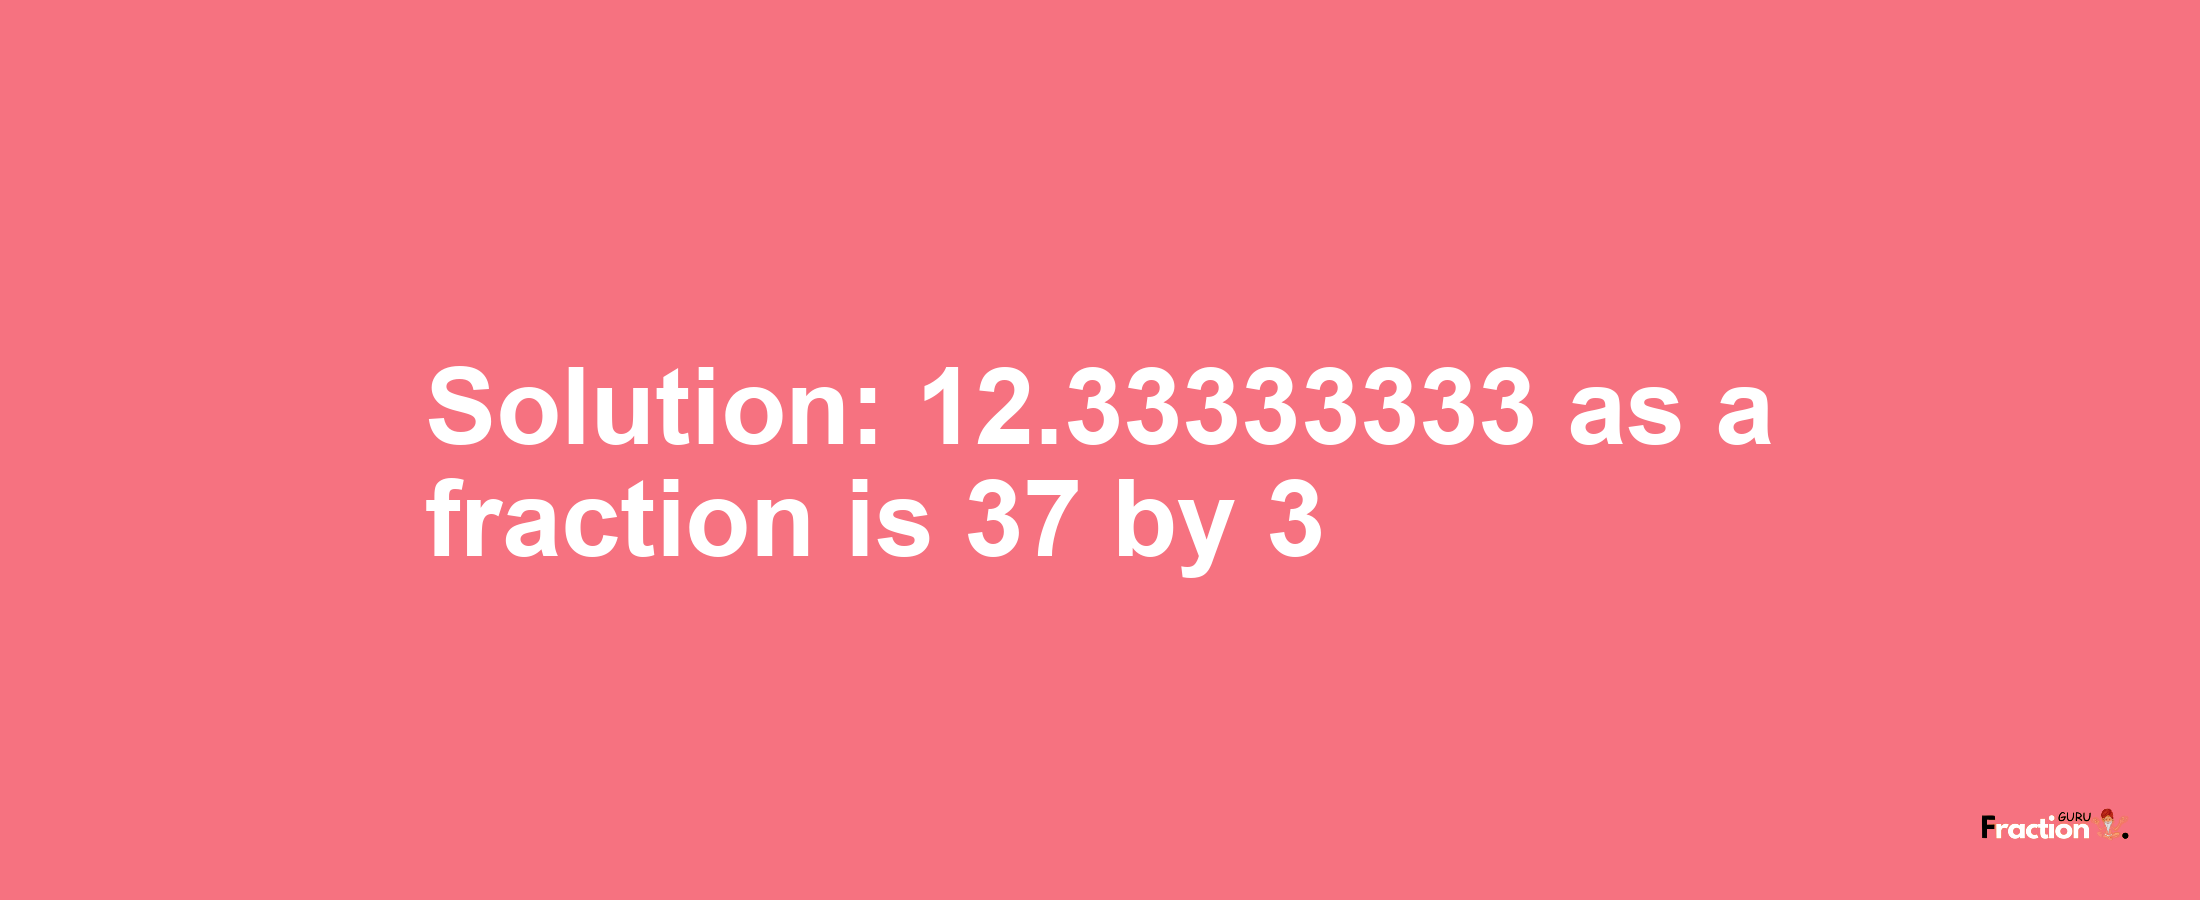 Solution:12.33333333 as a fraction is 37/3